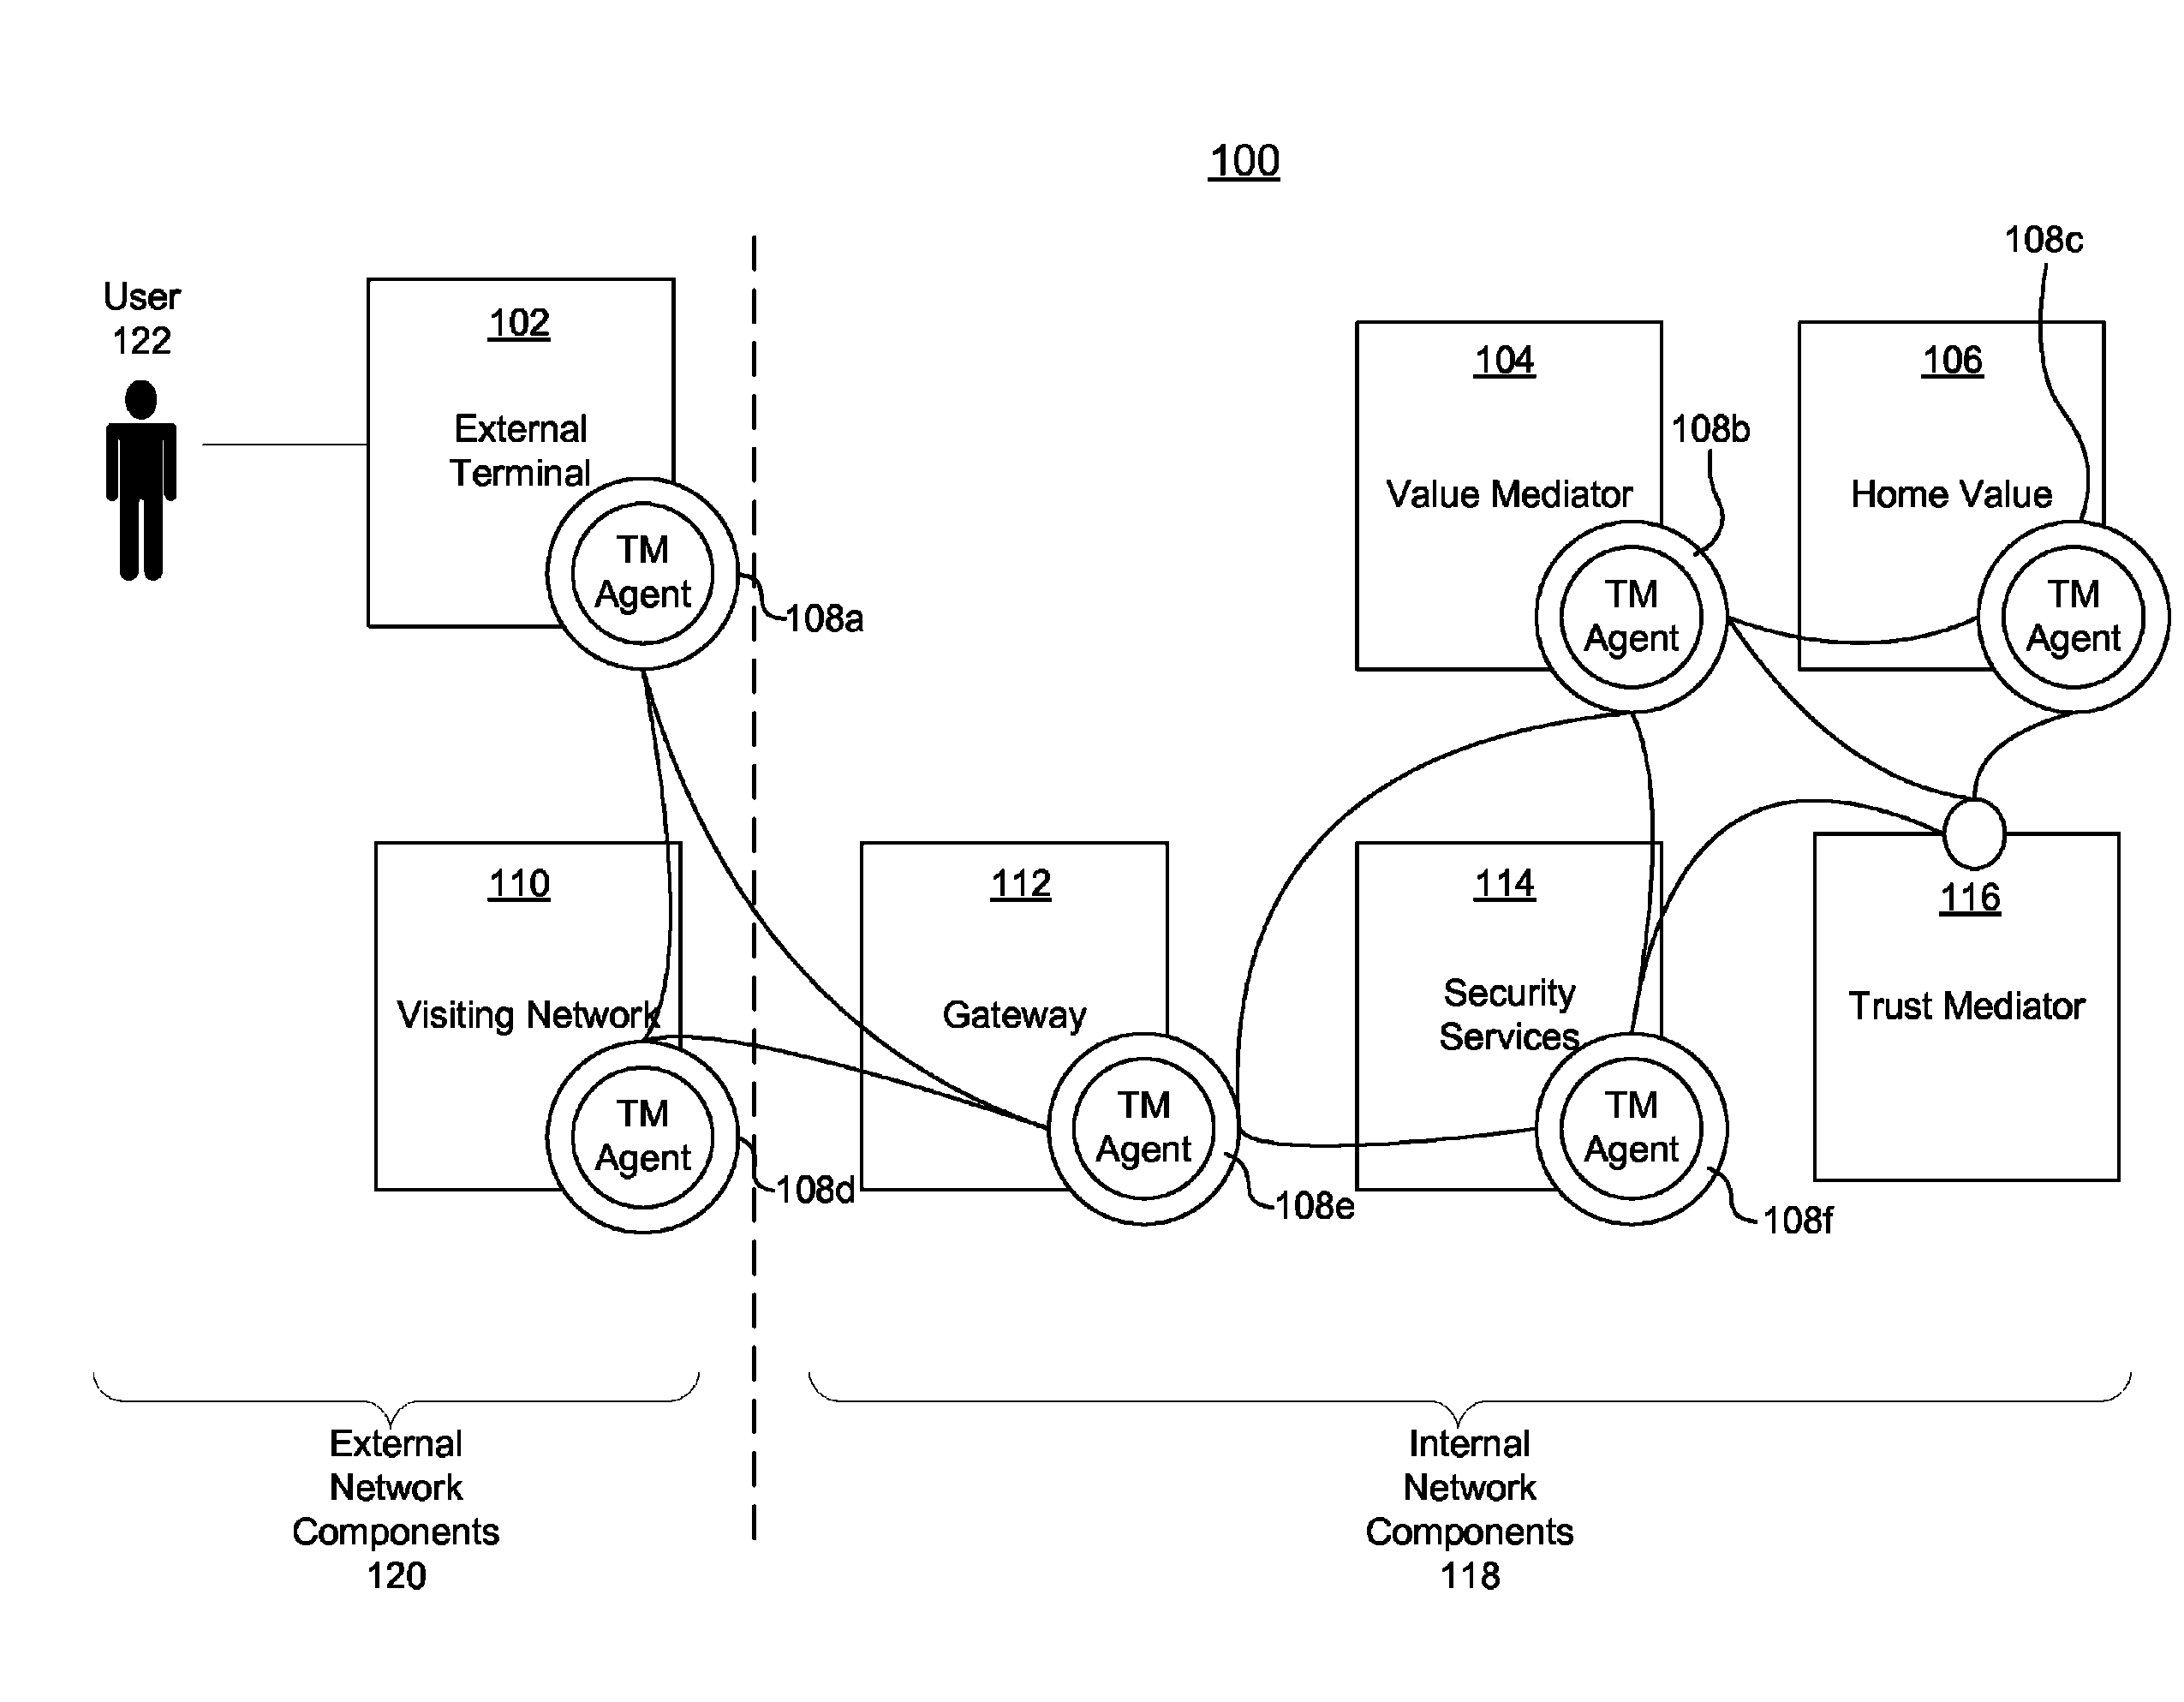 Systems, methods, and computer program products for adapting the security measures of a communication network based on feedback